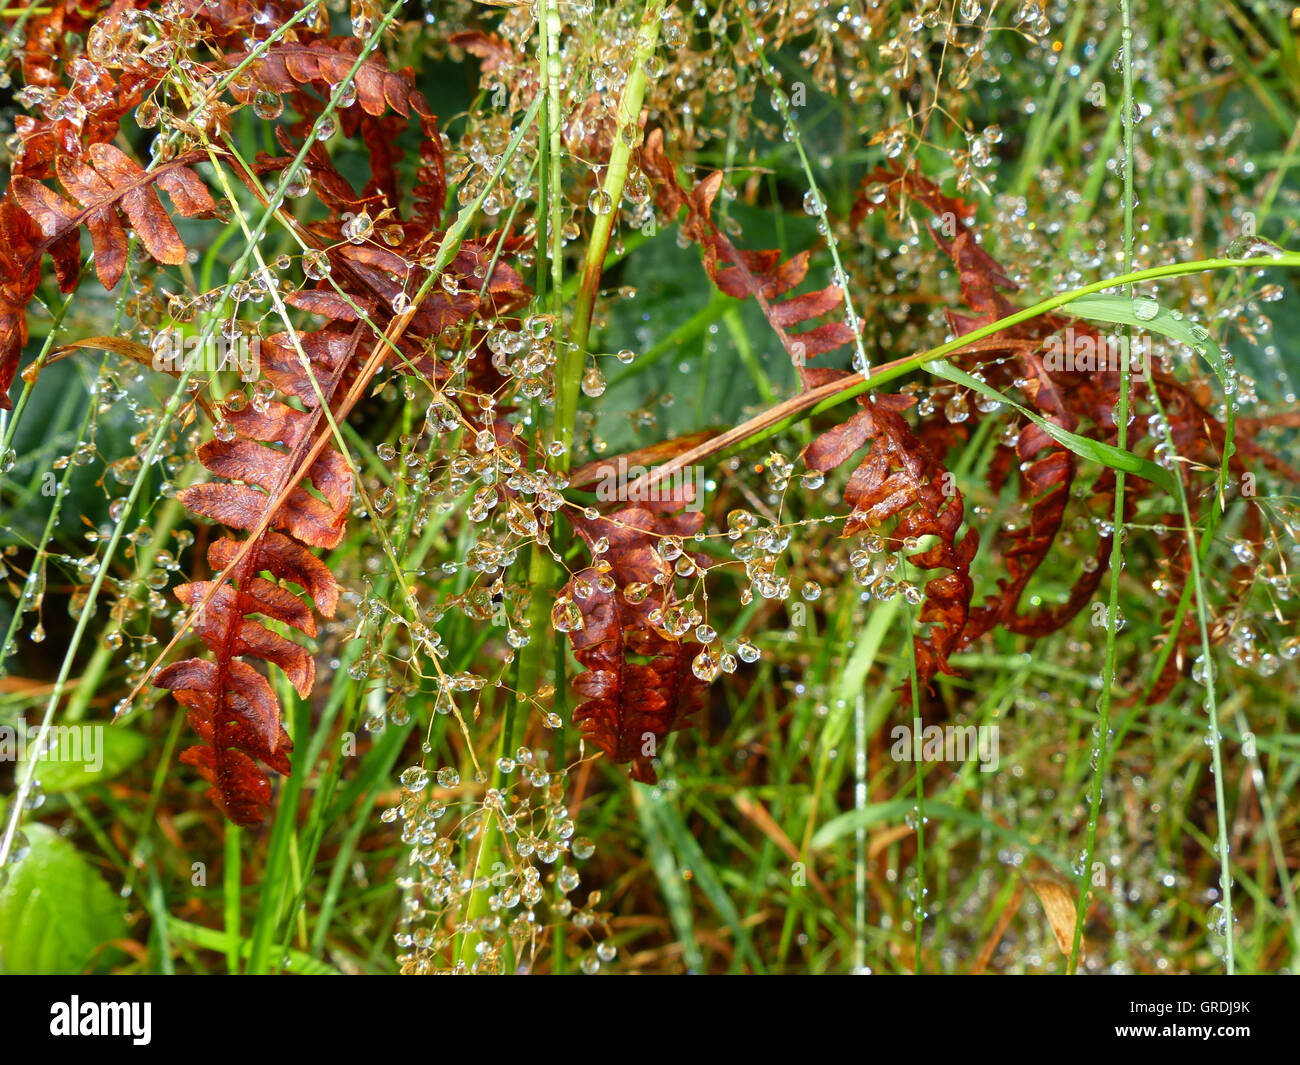 Dewdrop On Grasses And Ferns Stock Photo